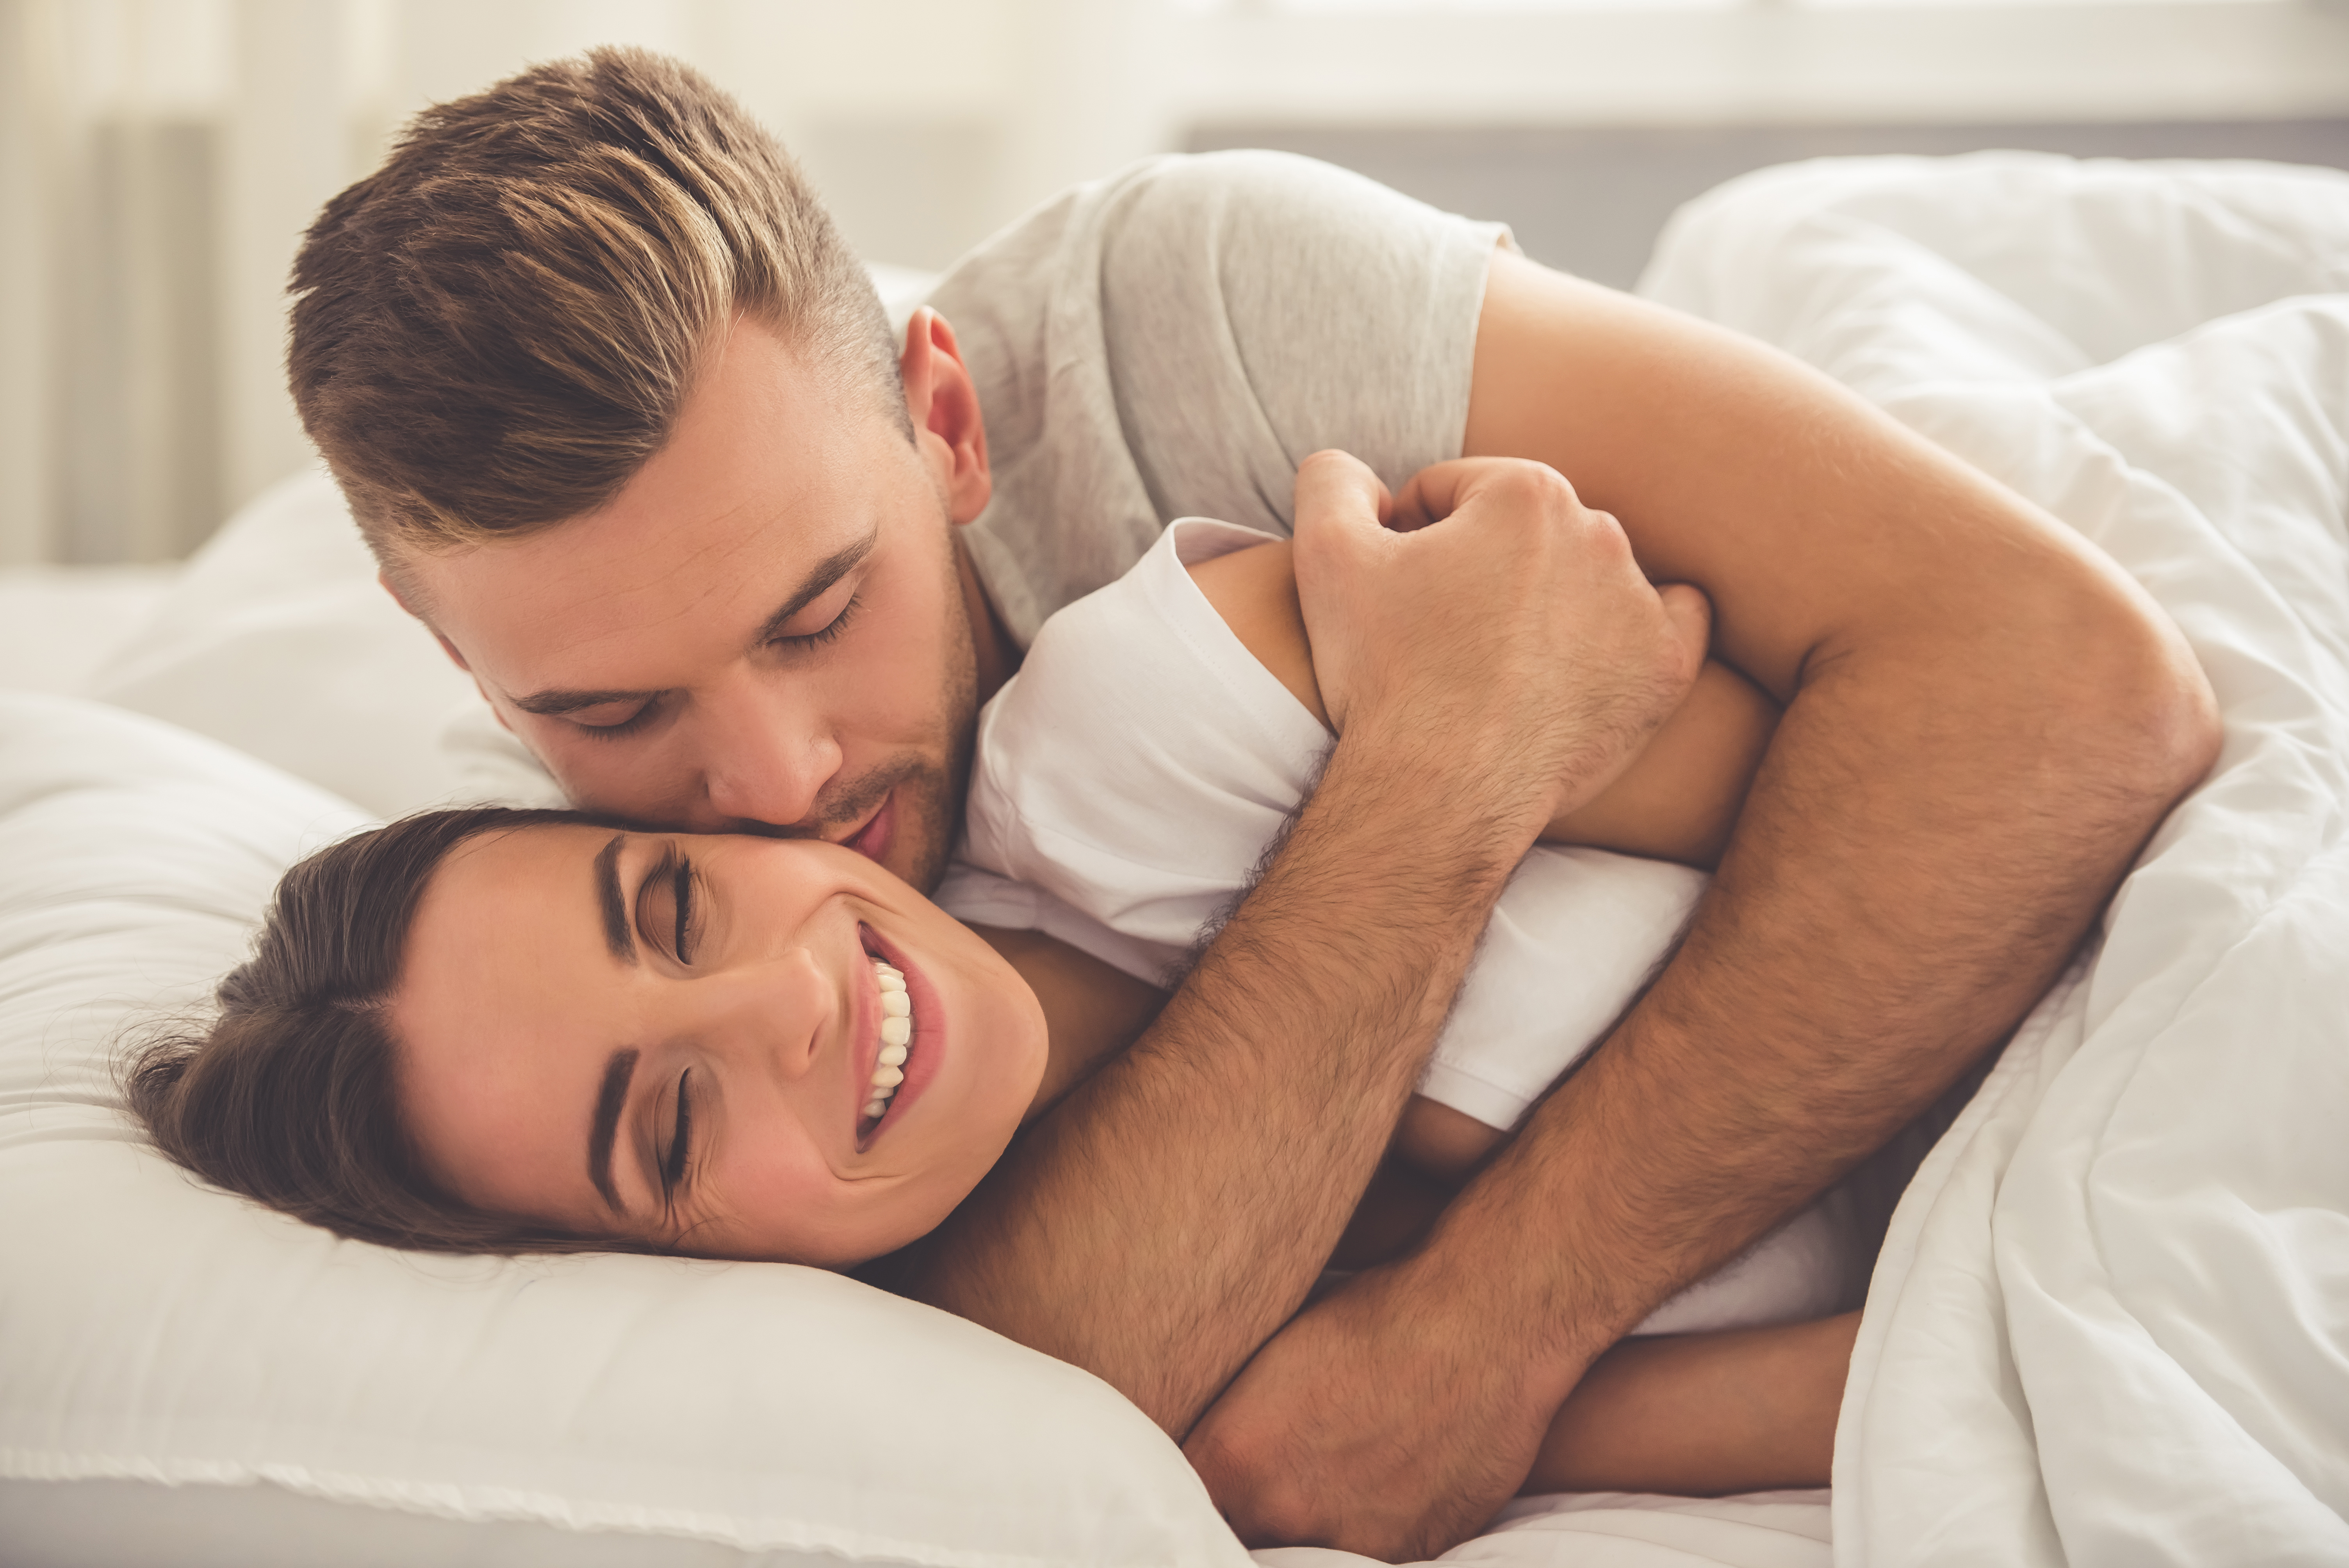 How To Seduce A Pisces Man In Bed